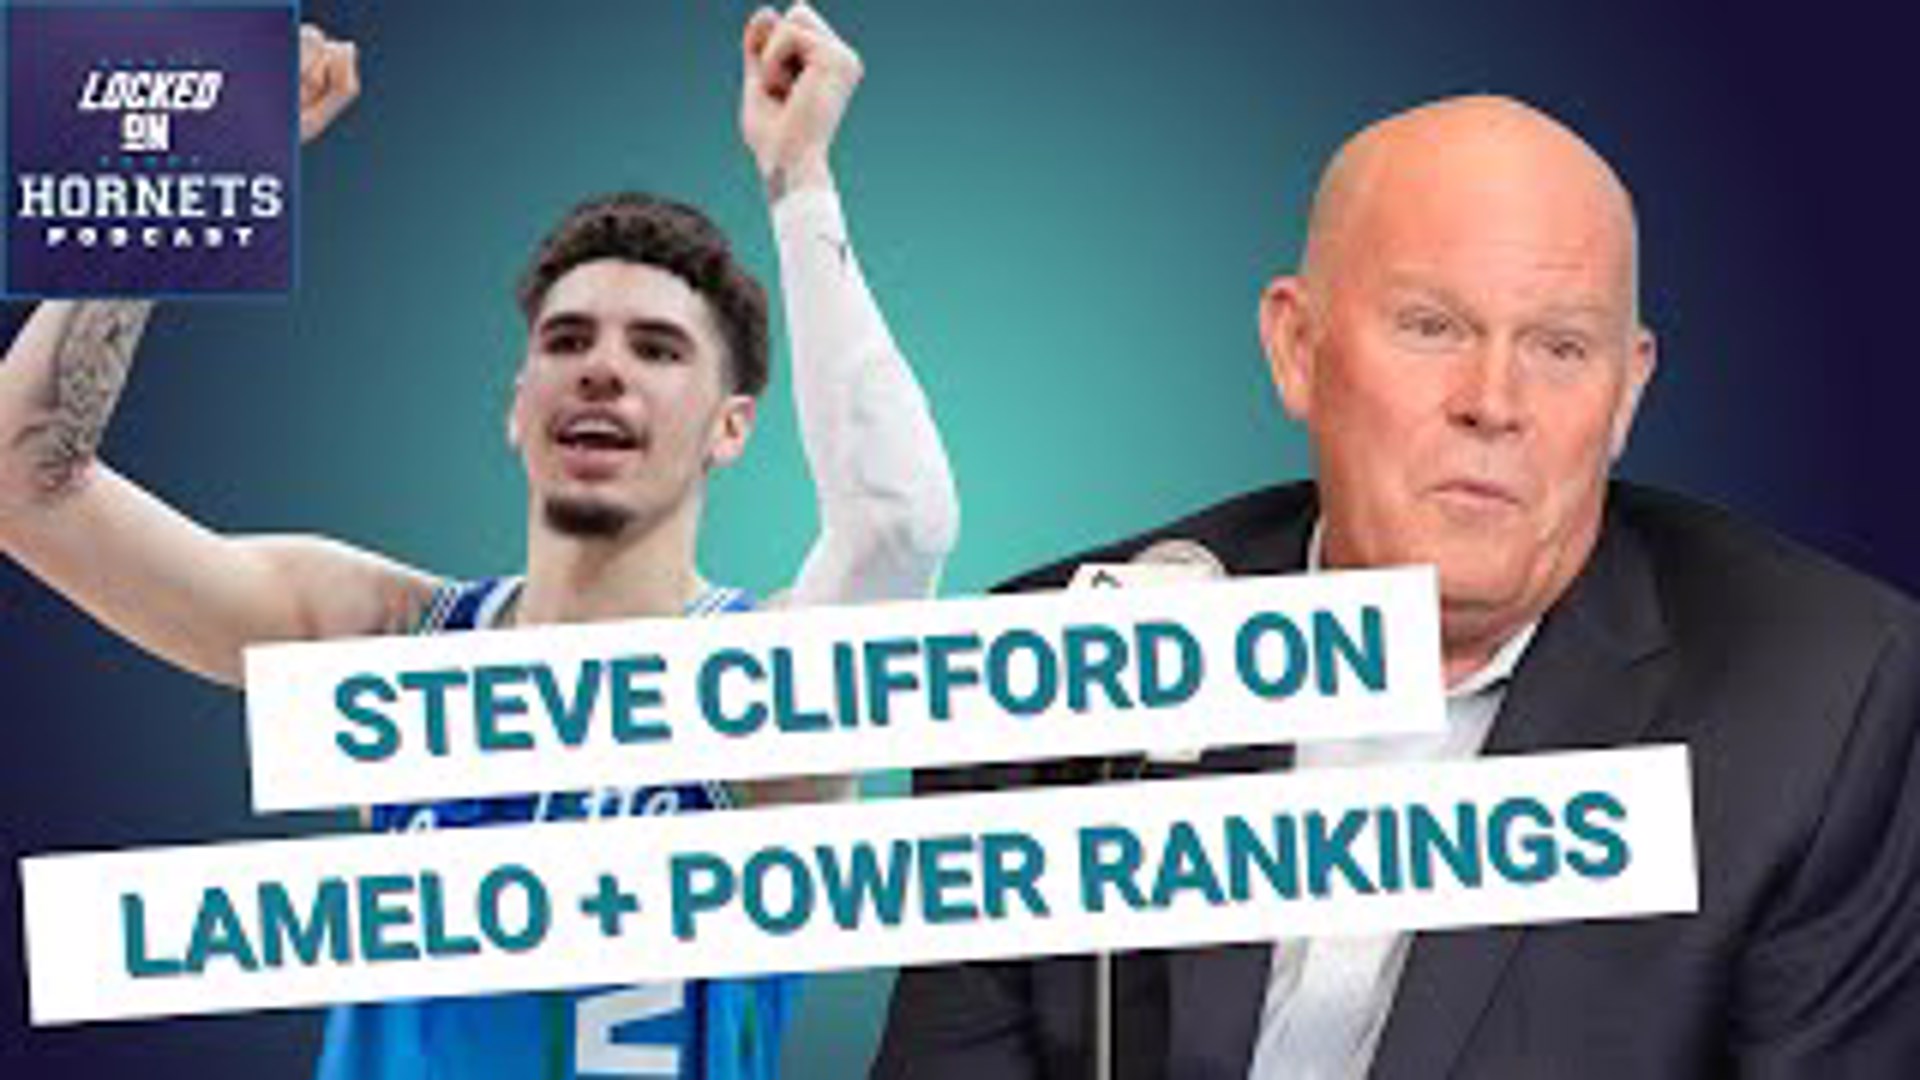 Steve Clifford gives an update on LaMelo Ball's development this offseason. Plus, we discuss the upcoming Hornets season. That and more on Locked On Hornets!